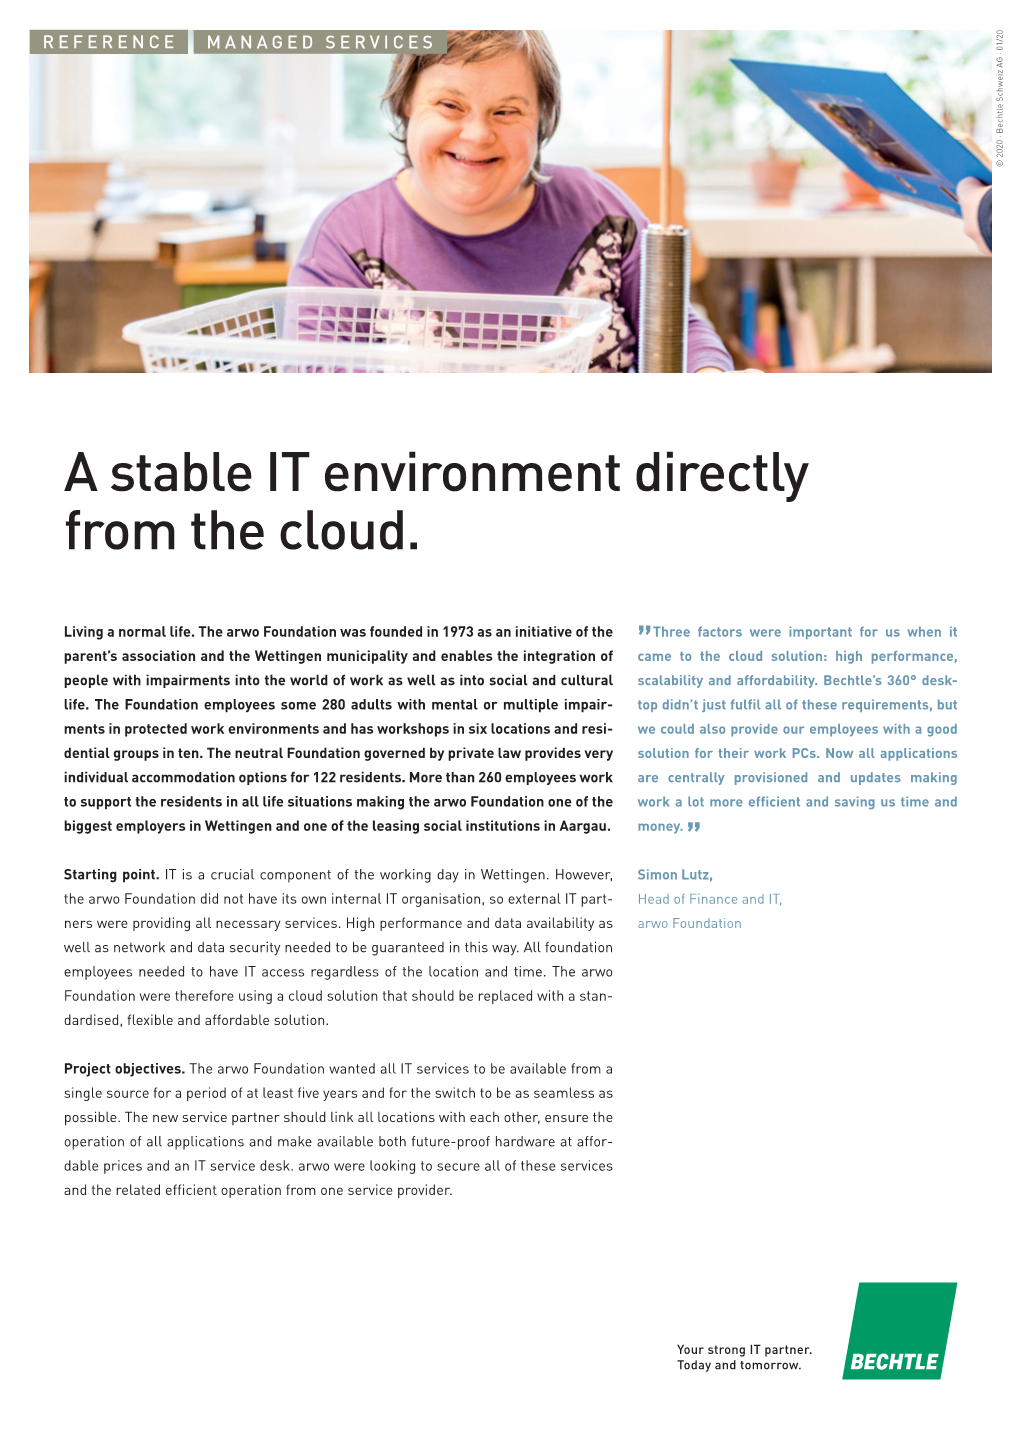 A Stable IT Environment Directly from the Cloud